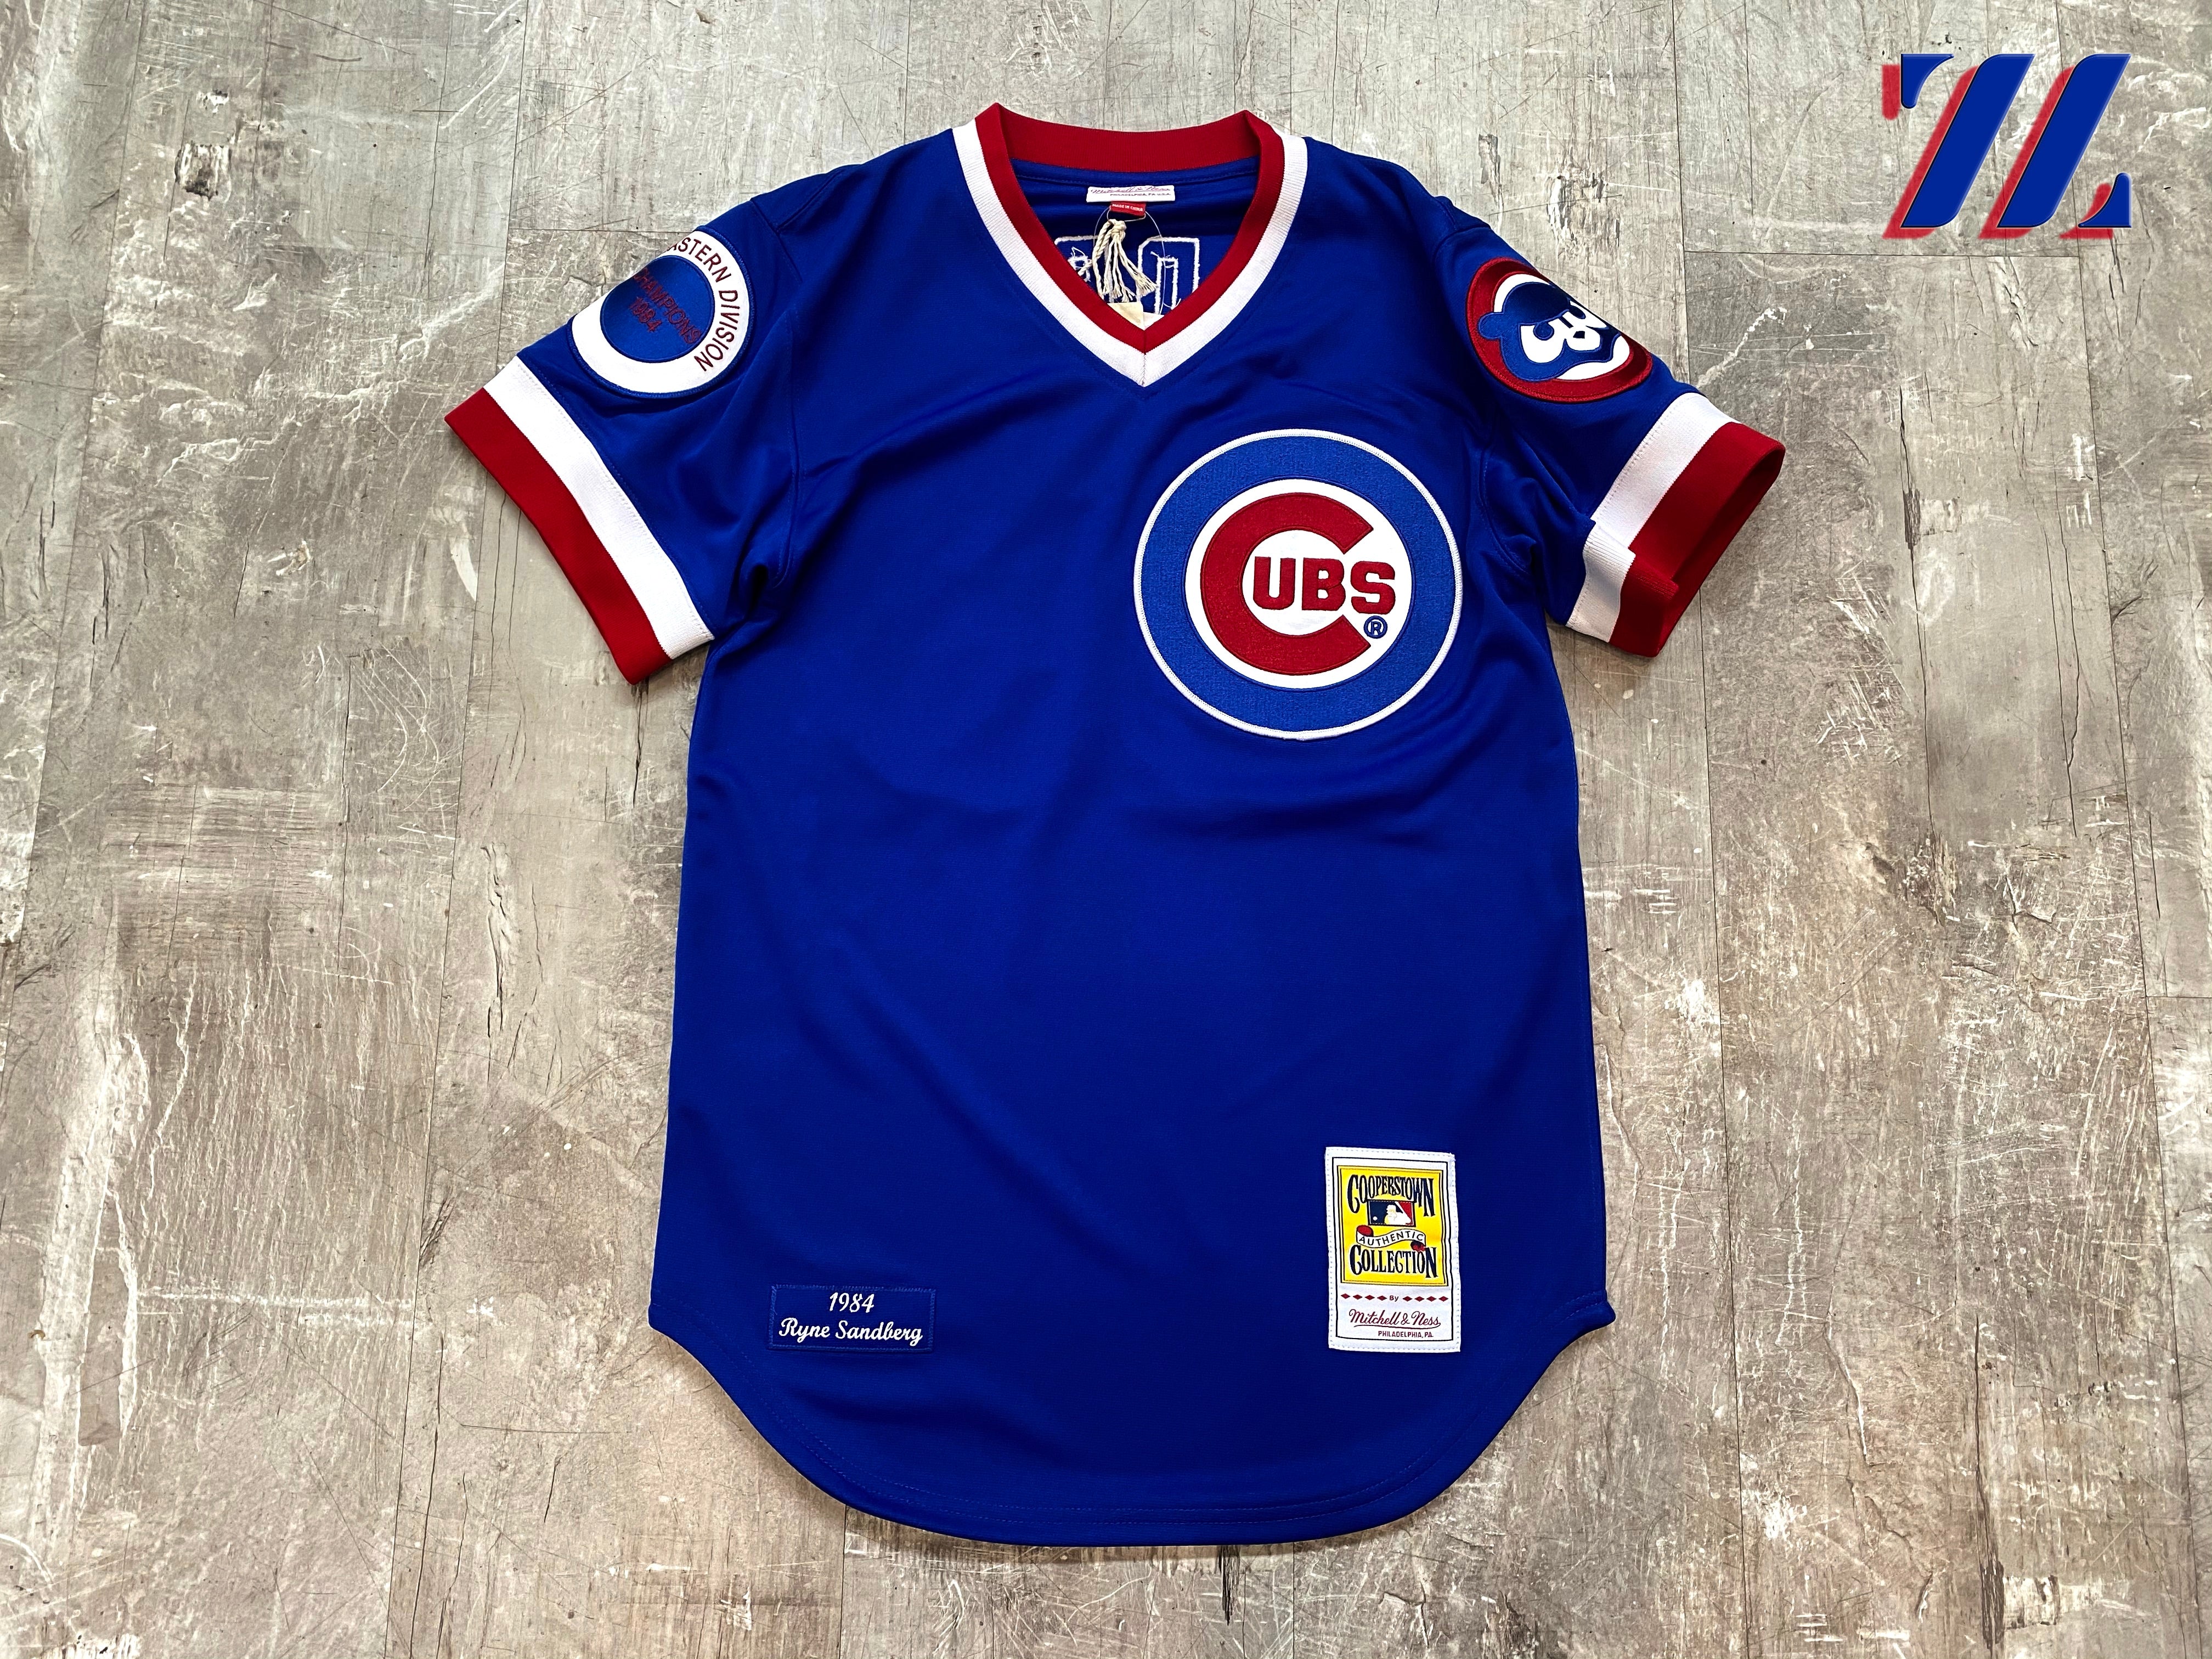 Mitchell & Ness Ryne Sandberg Chicago Cubs Cooperstown Authentic